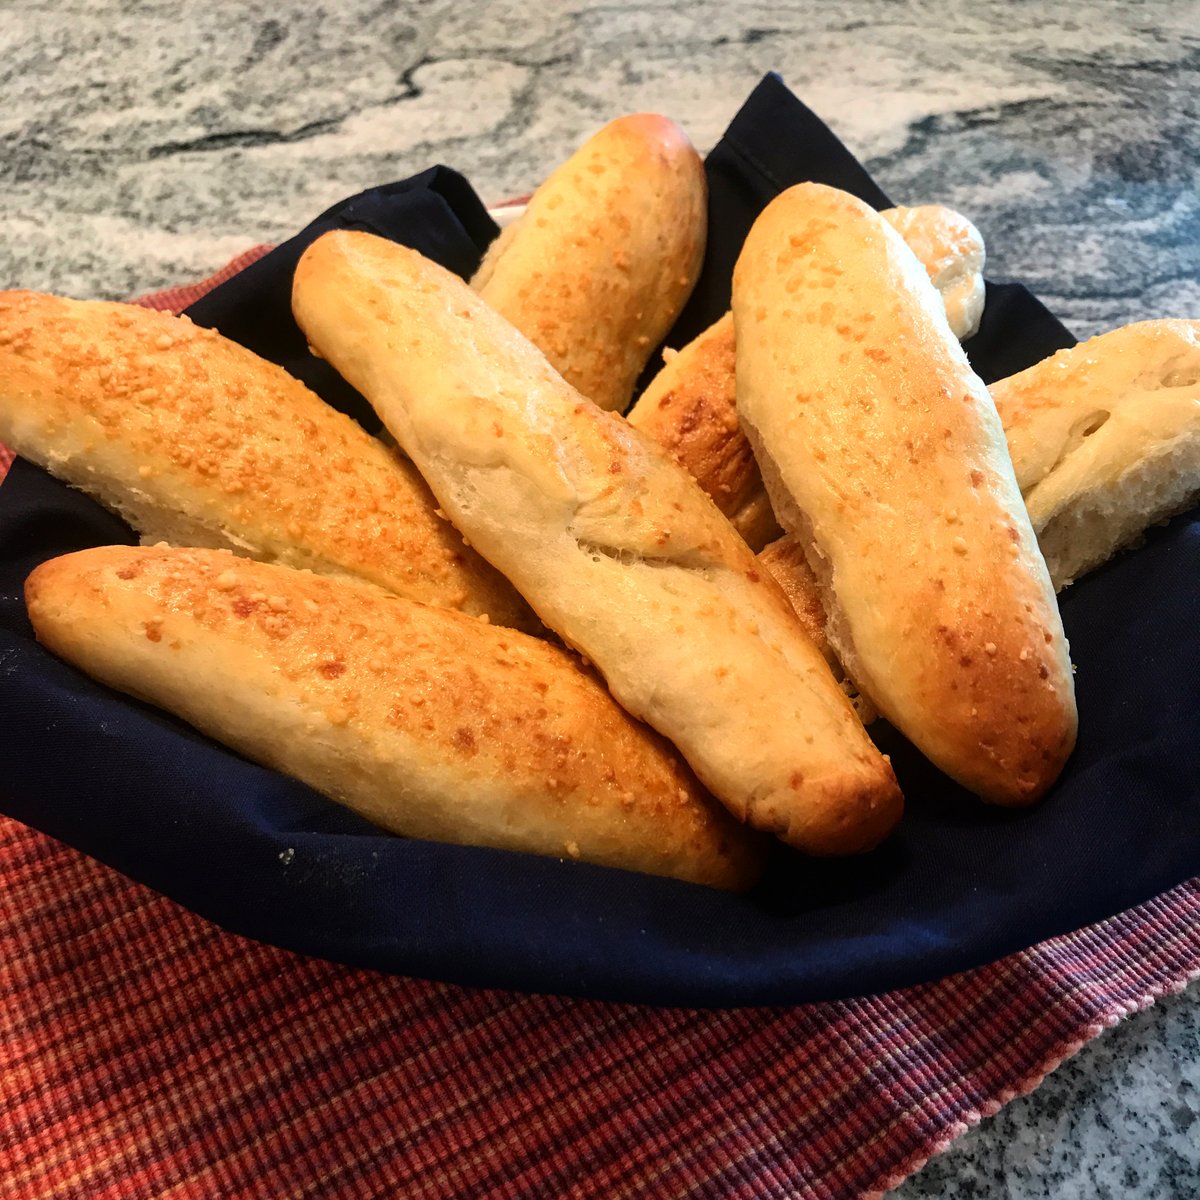 Bread #34: Parmesan Breadsticks. These were pretty tasty! They were...parmesan breadsticks lol. They delivered on that premise. Not a point of nostalgia or emotional attachment for me, but if they are for you, worth a bake! I was very lazy and haphazard in my shaping lol